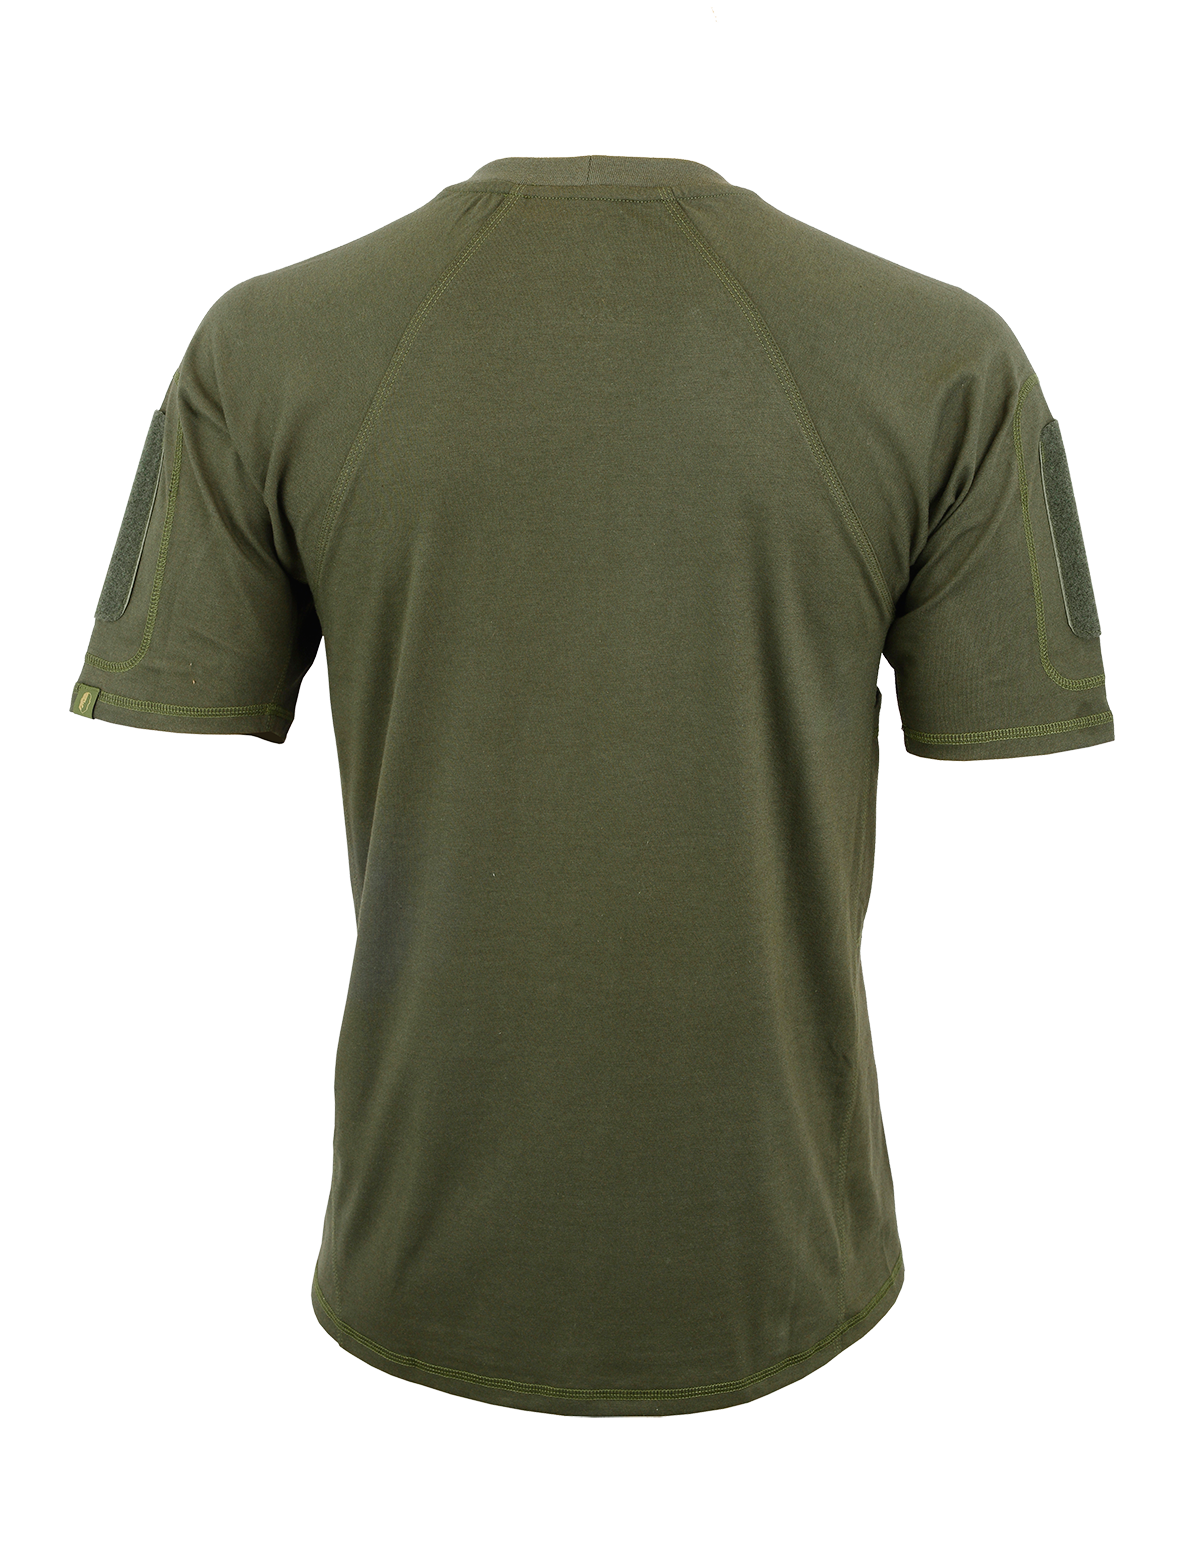 Tactical Zone instructor shirt in OD Camo Back